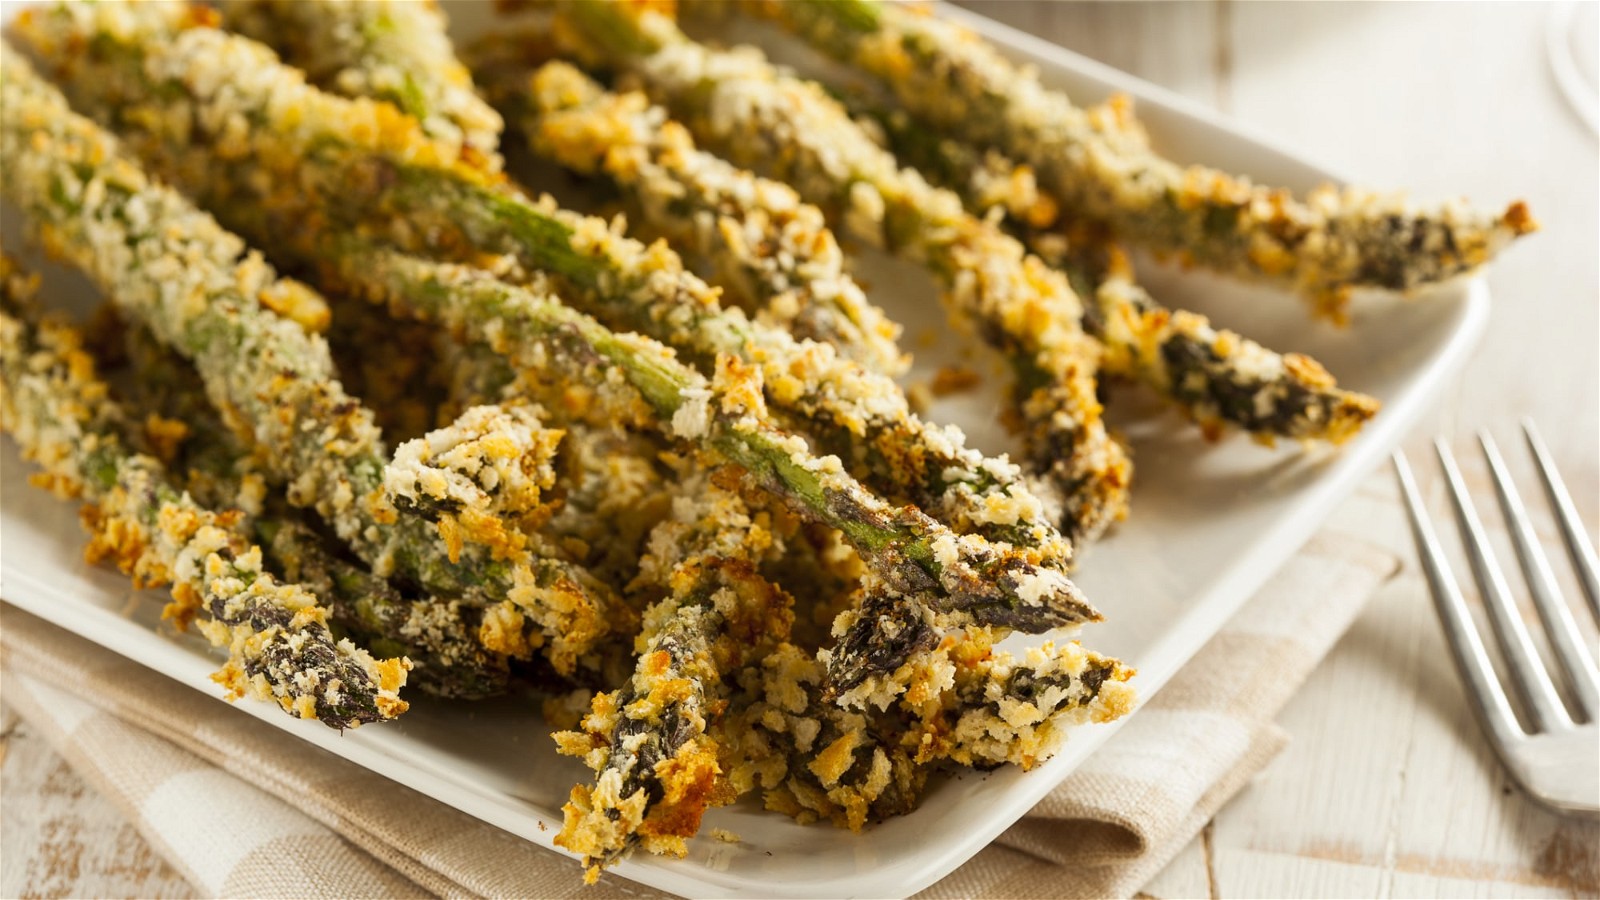 Image of Baked Asparagus Fries with Lemon Pepper Aioli